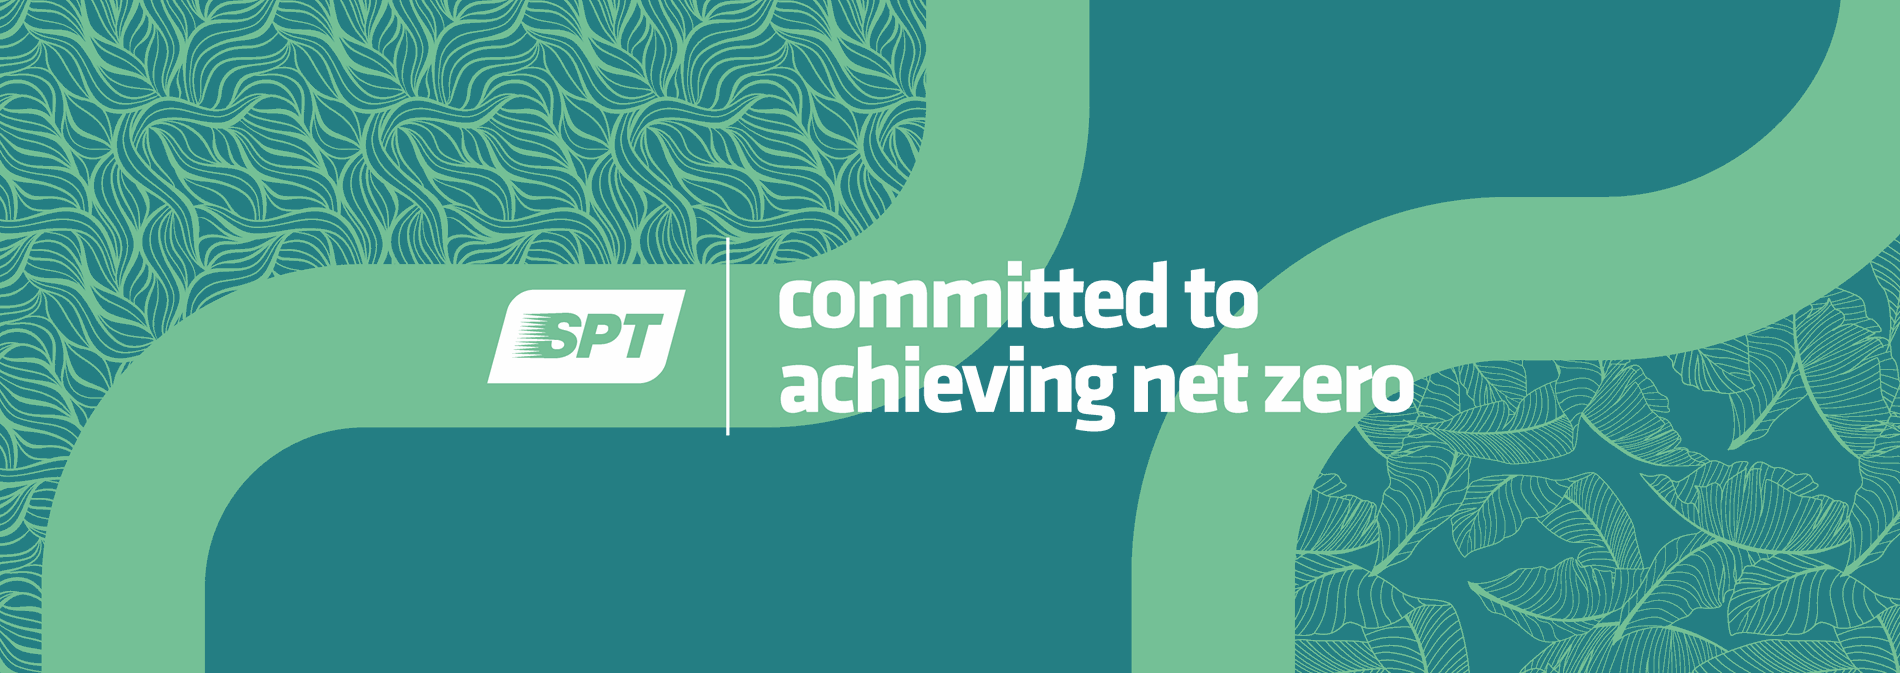 SPT, committed to achieving net zero